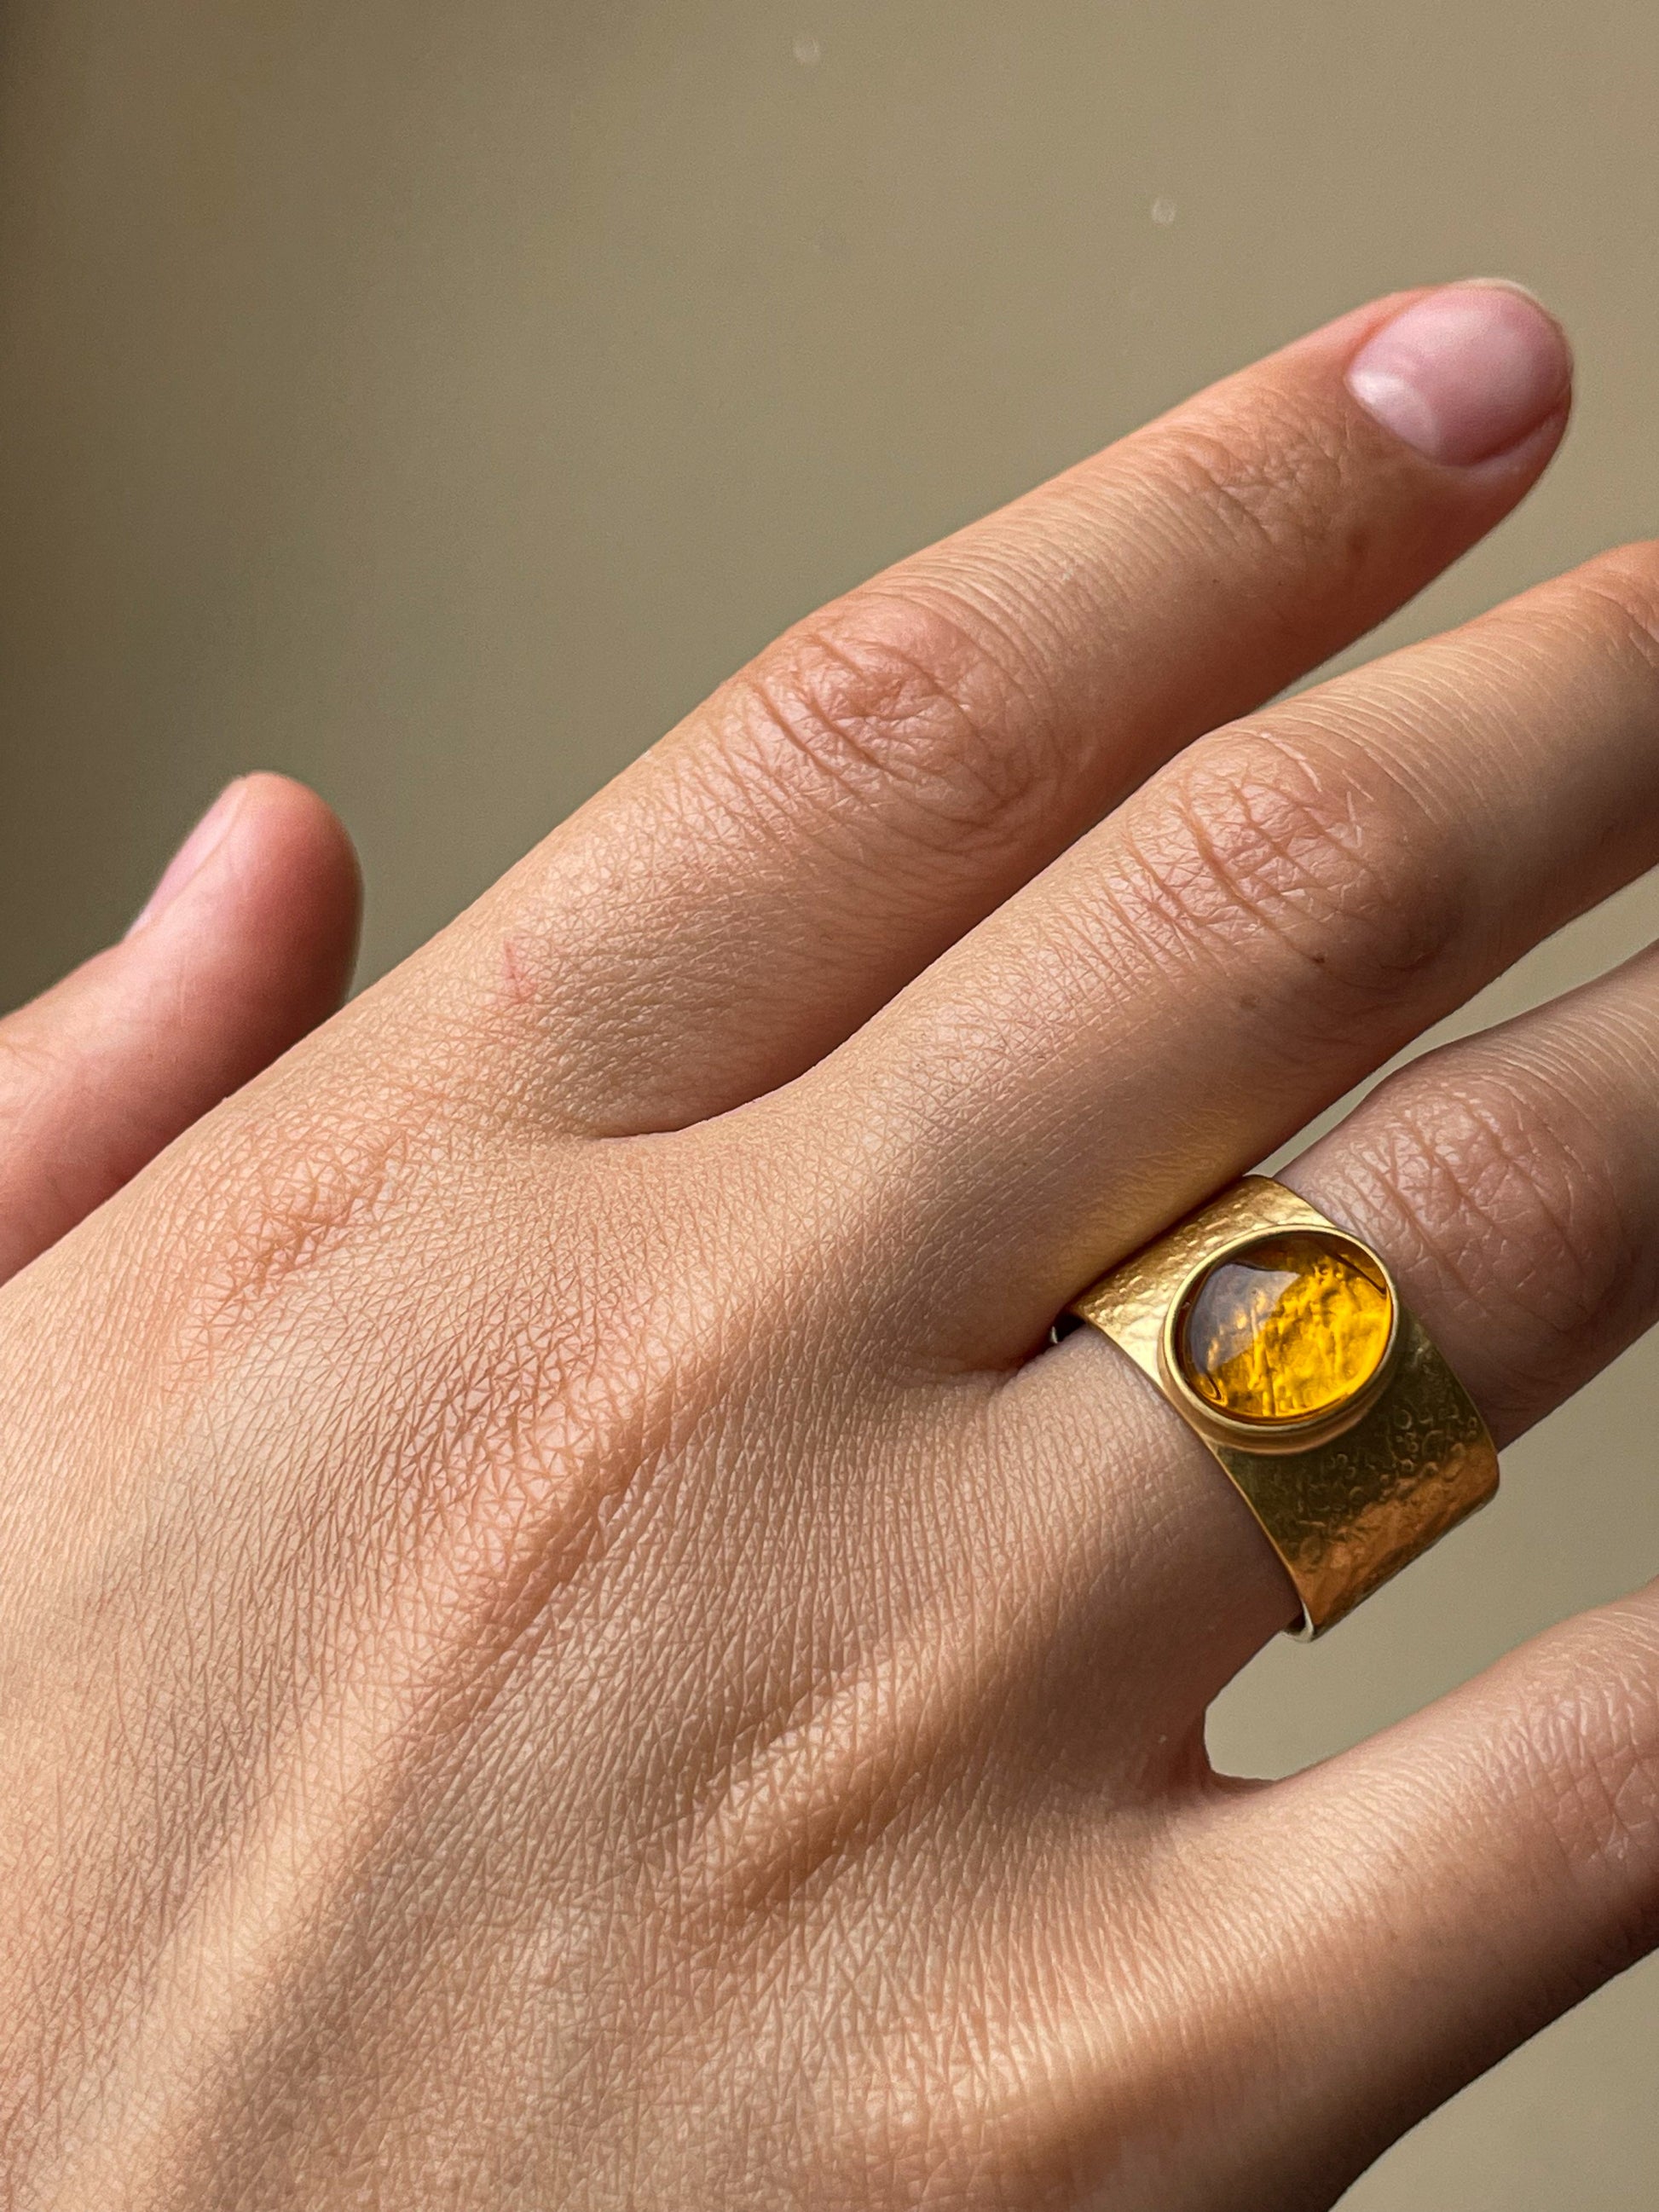 Red amber ring - Gold plated silver - Statement ring collection 